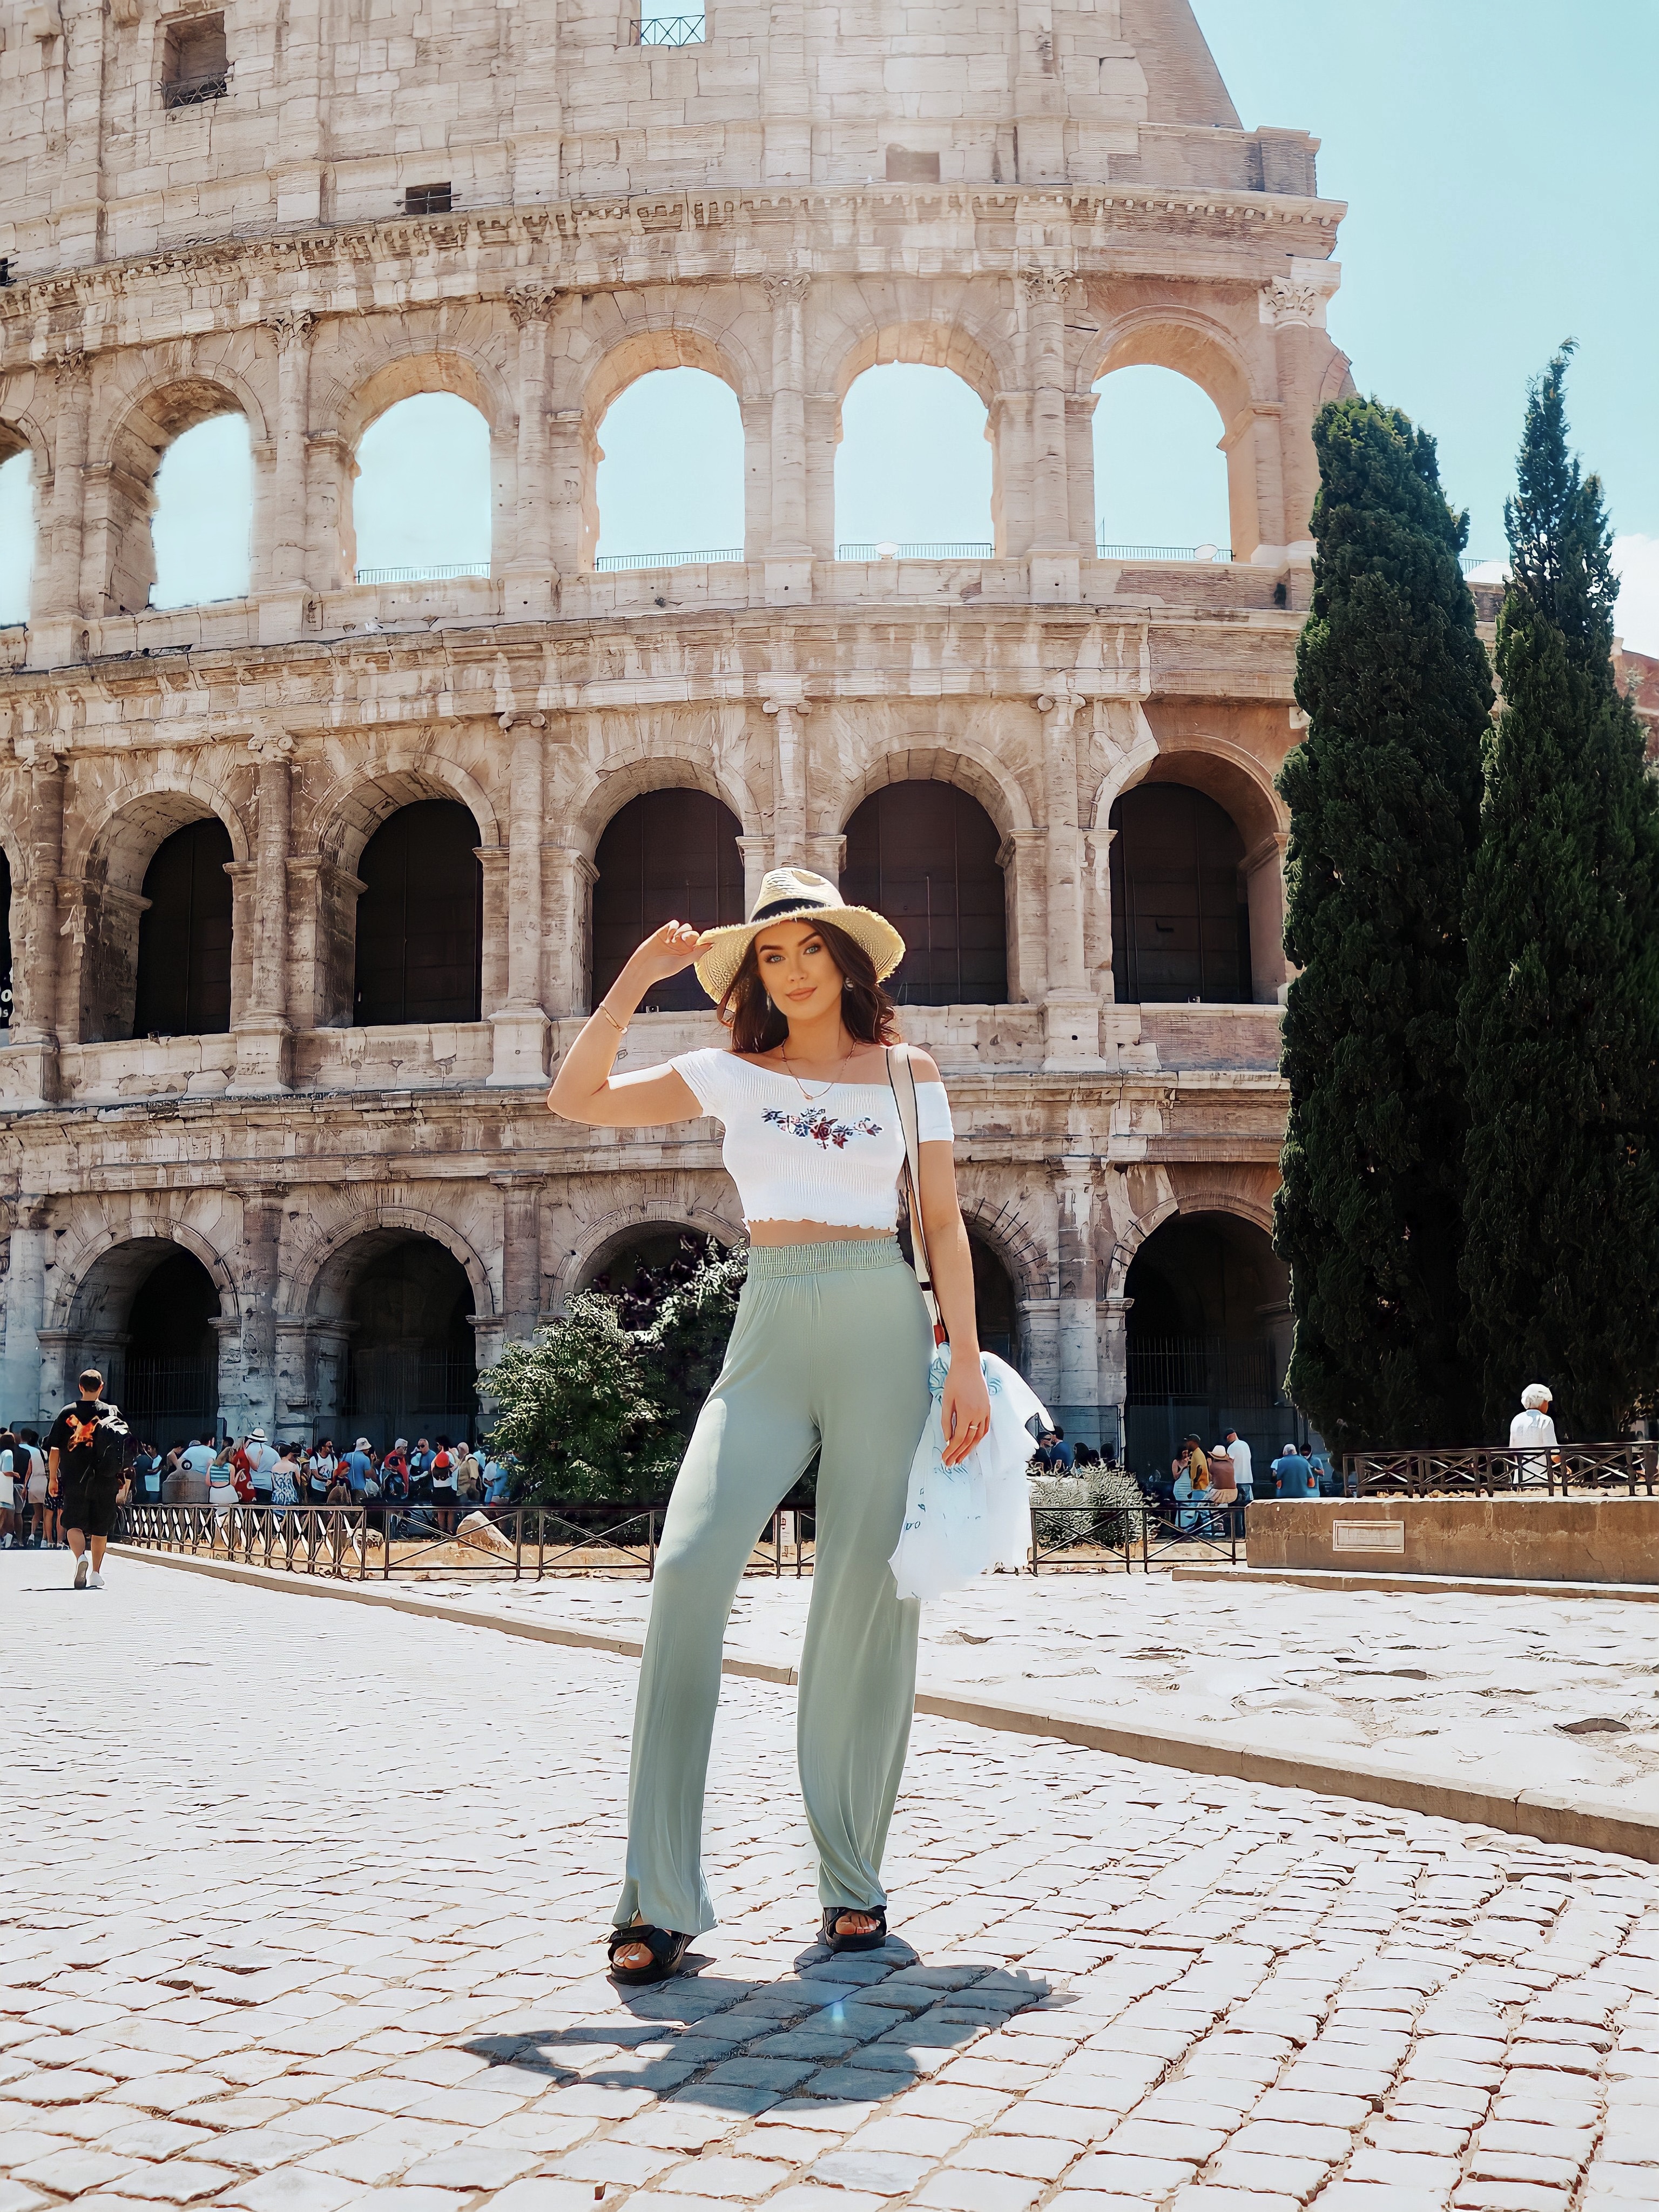 Terri standing in front of the Roman Colosseum in Italy.